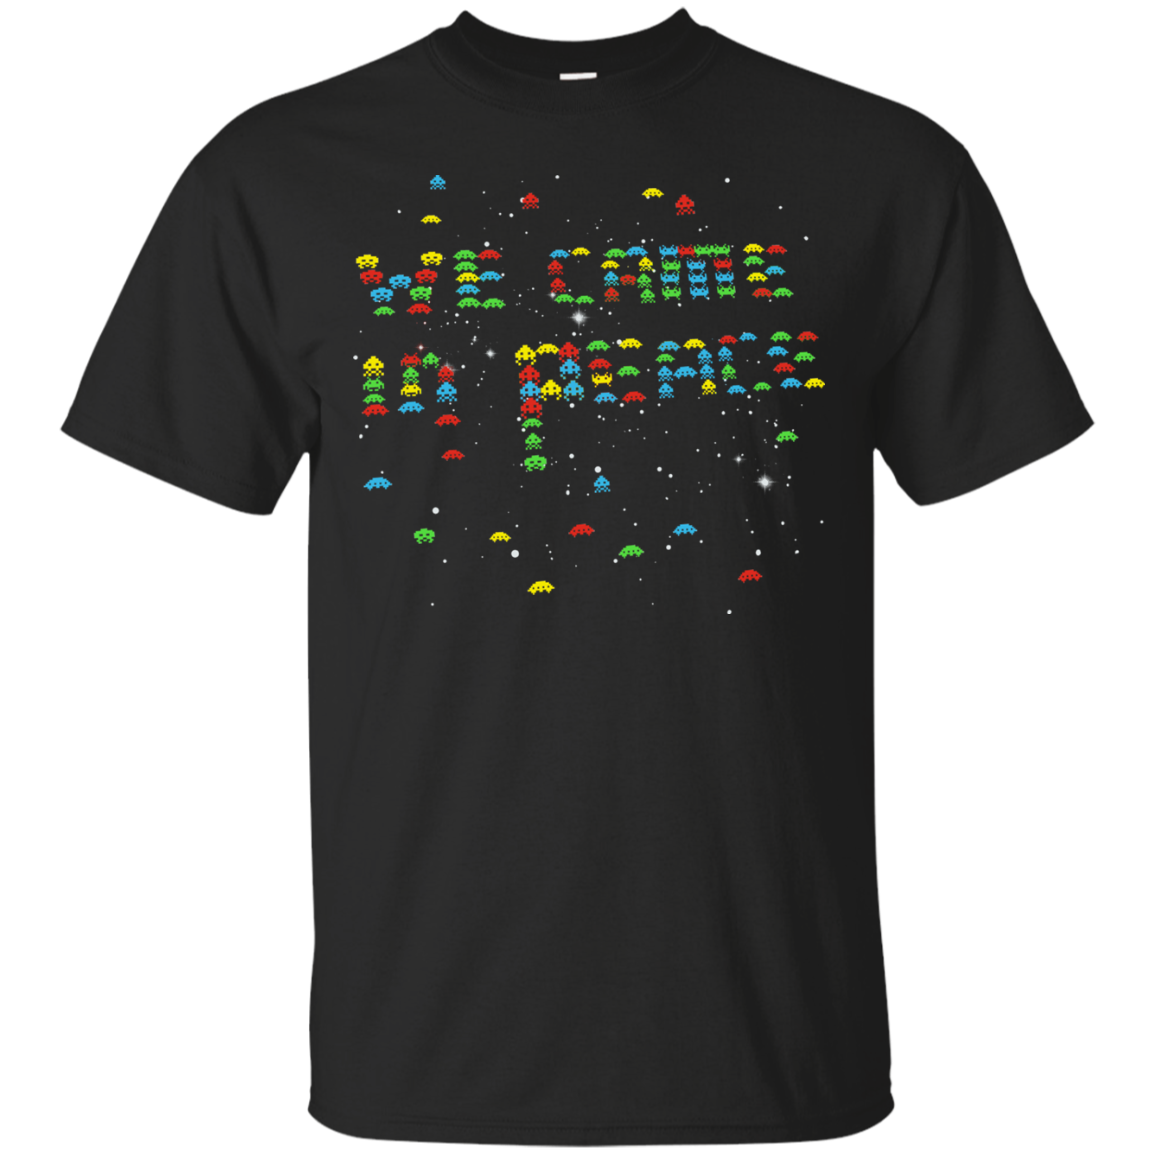 We came in peace T-Shirt